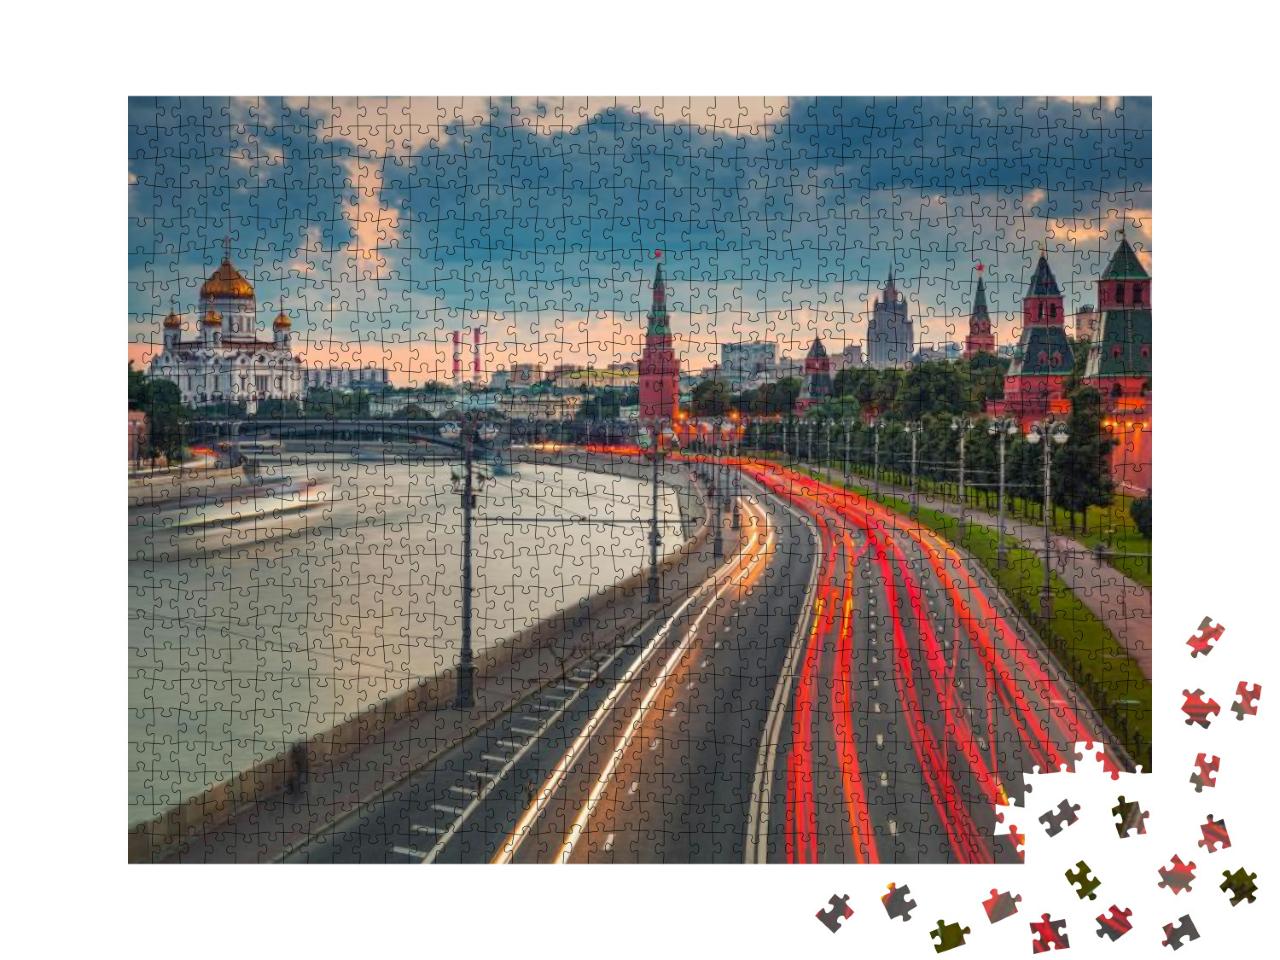 Traffic Near Kremlin in Moscow... Jigsaw Puzzle with 1000 pieces